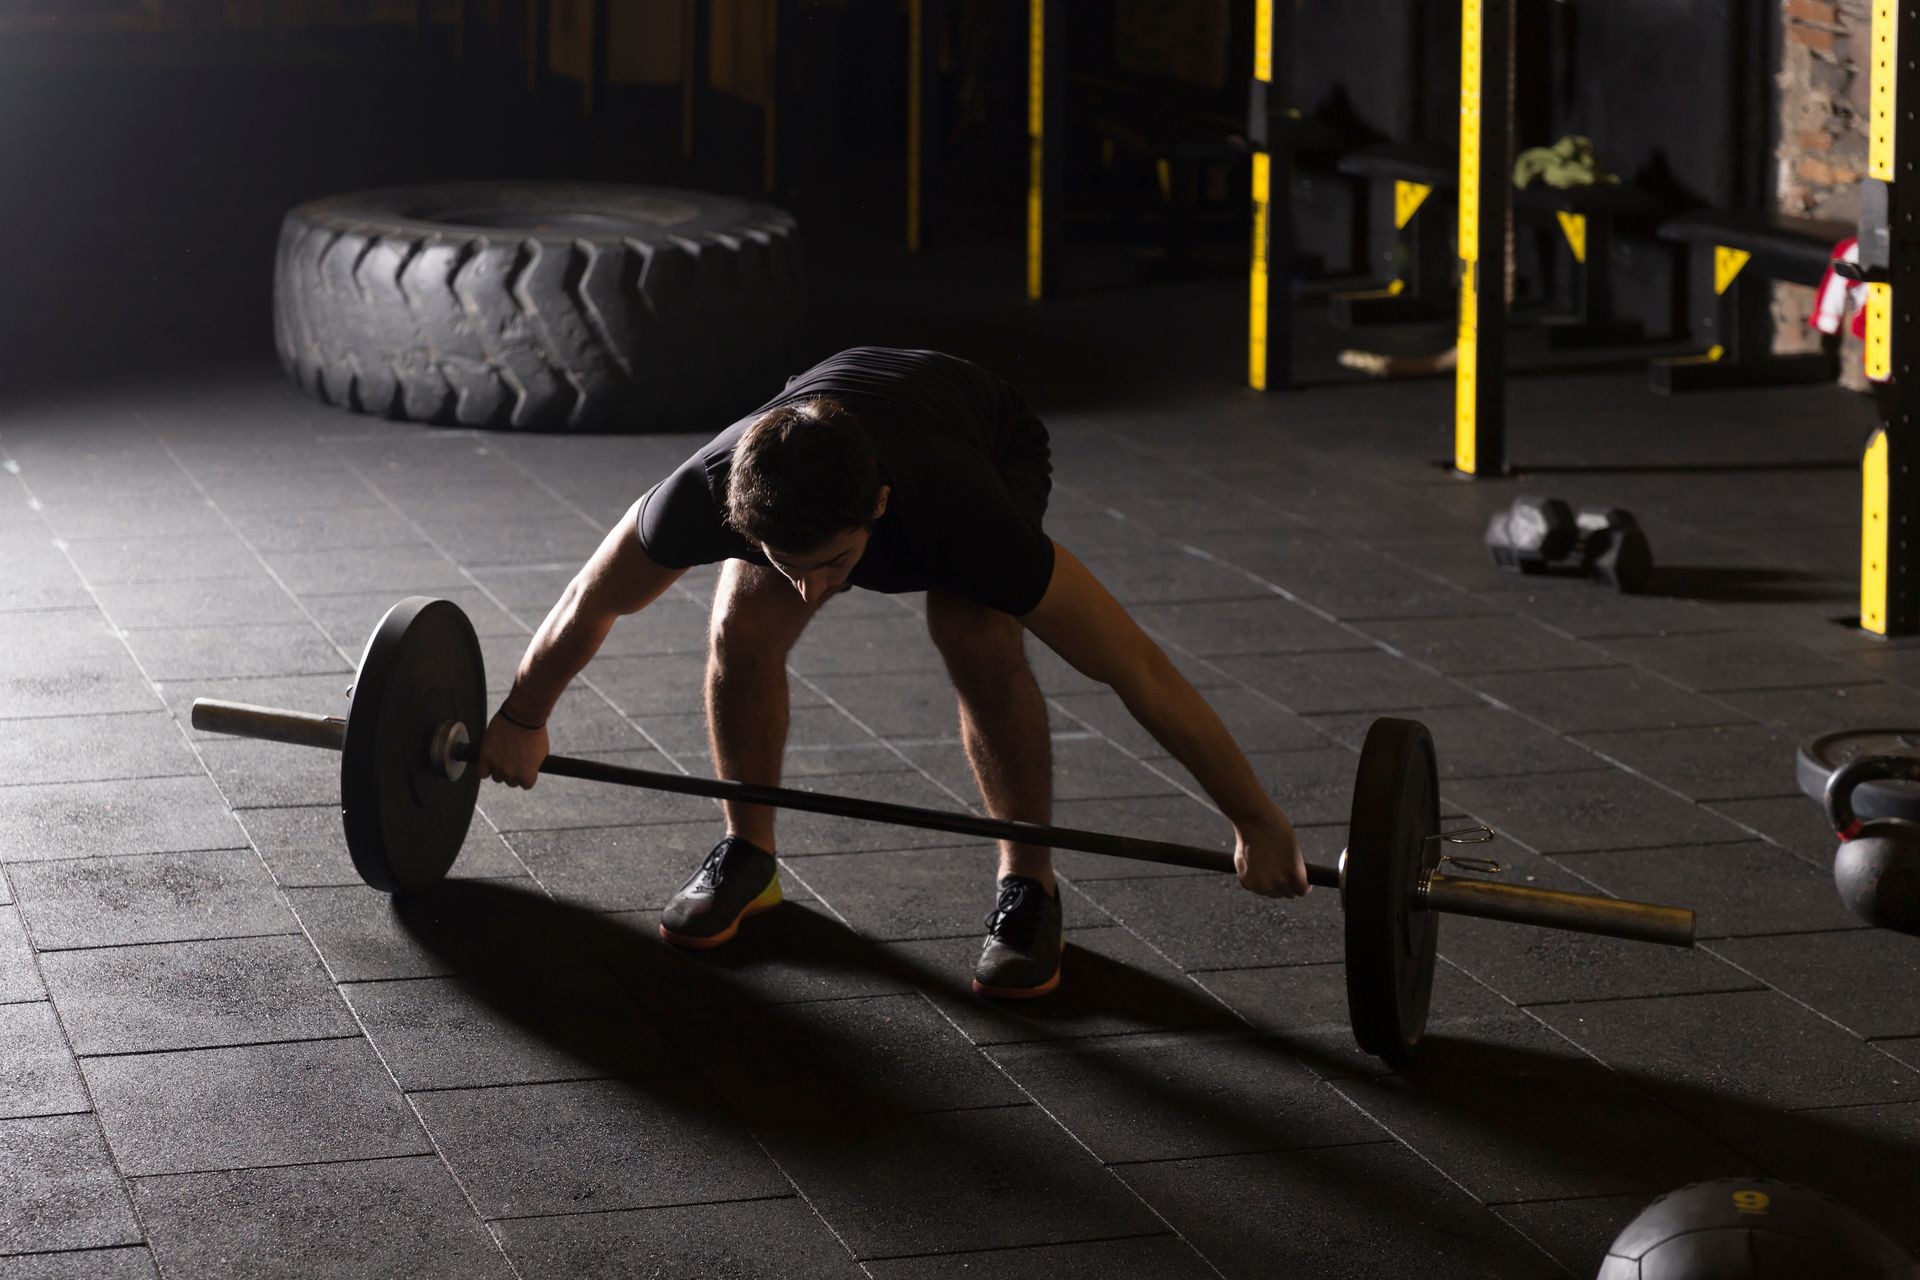 Male athlete practicing snatch movement at the gym.